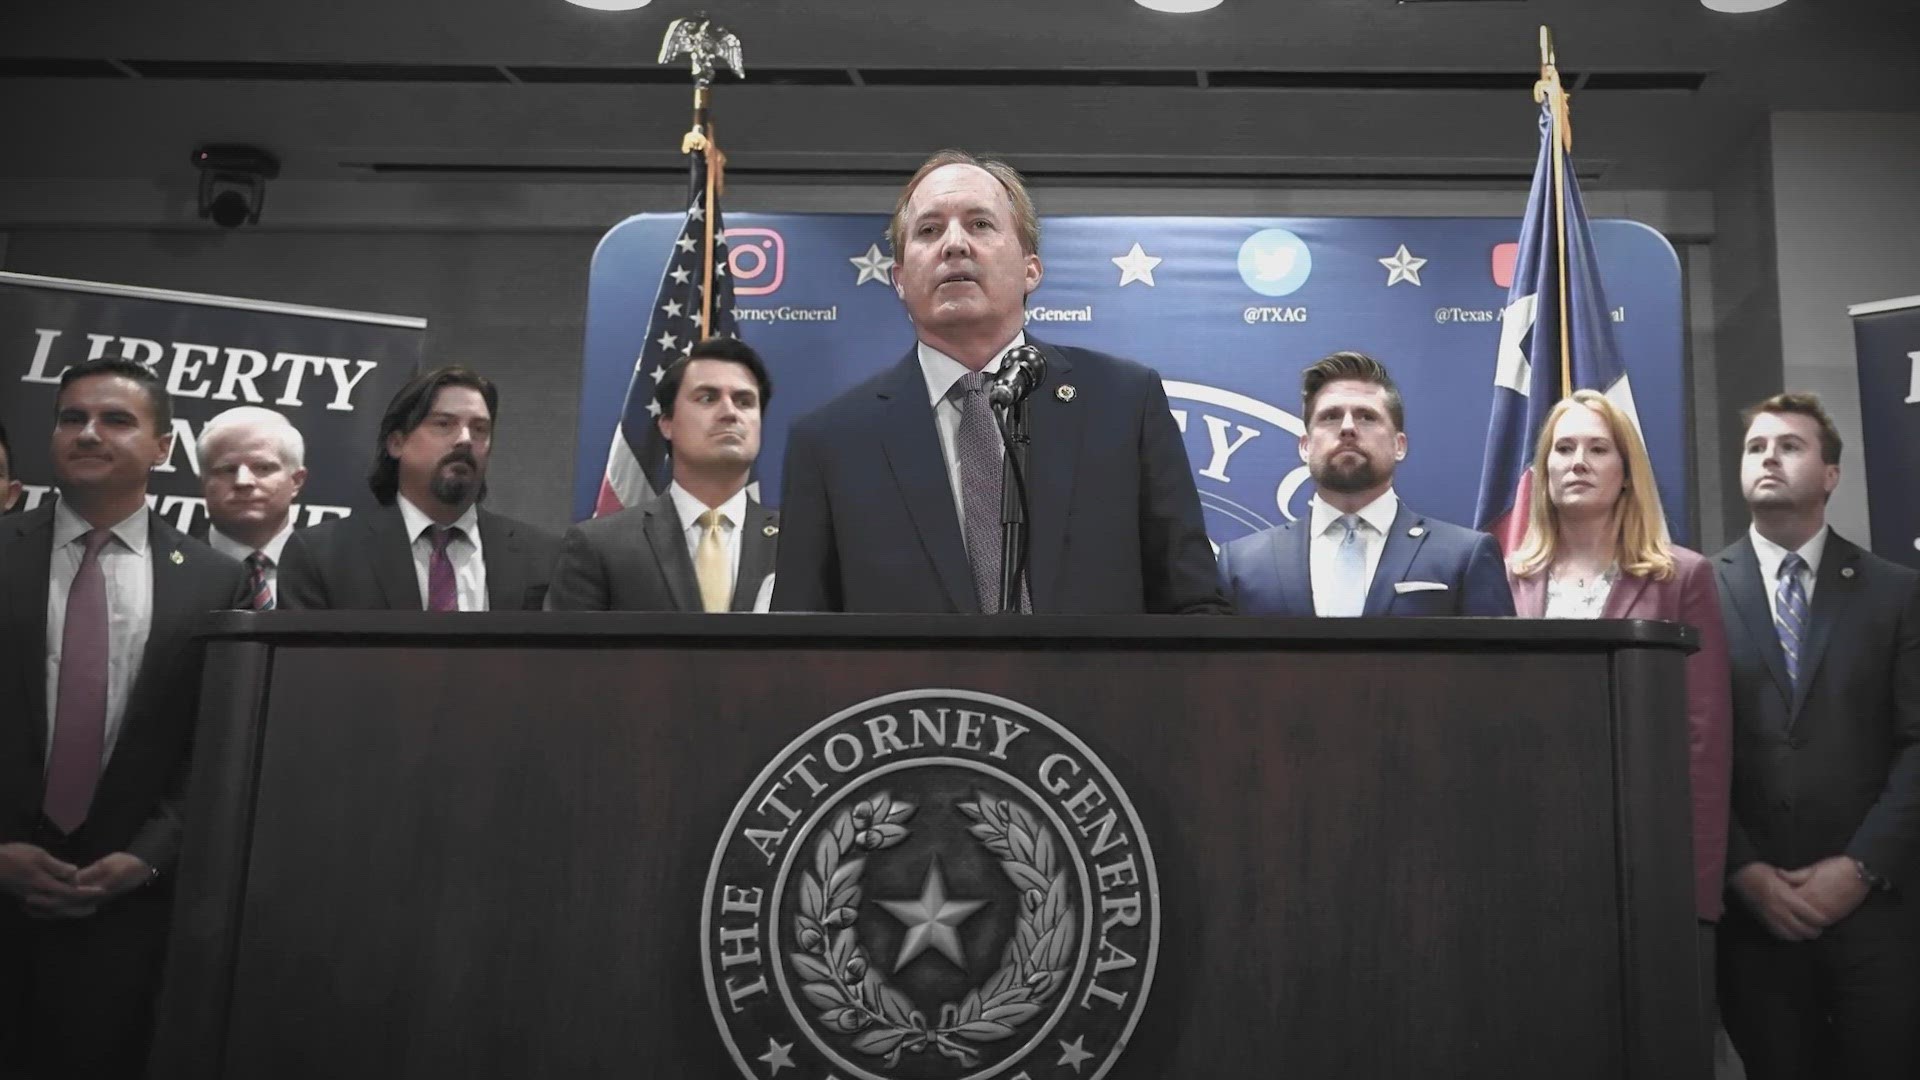 Ethics experts question how six lawyers on paid leave from their state jobs got approval to represent Ken Paxton in his upcoming impeachment.